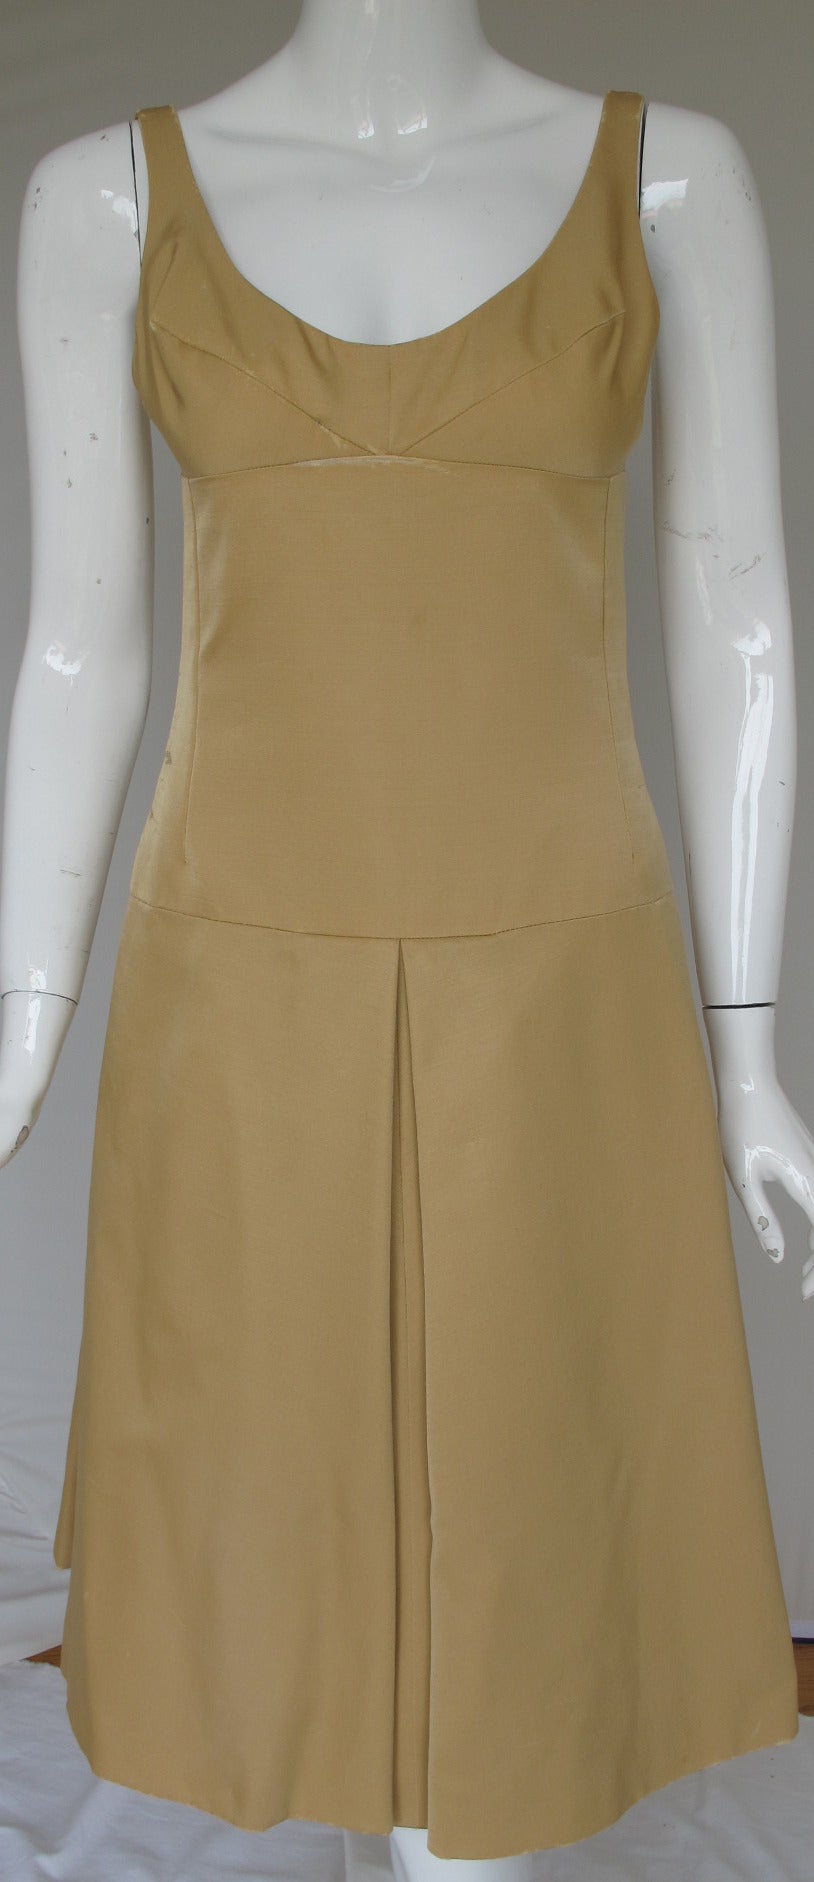 A spectacular 1960 Marguery Bolhagen ensemble comprised of a champagne-colored silk faille dress and matching over-jacket/bolero. The dress came from the Brooklyn Museum de-accession and once belonged to Austine McDonnell Hearst - Mrs. William